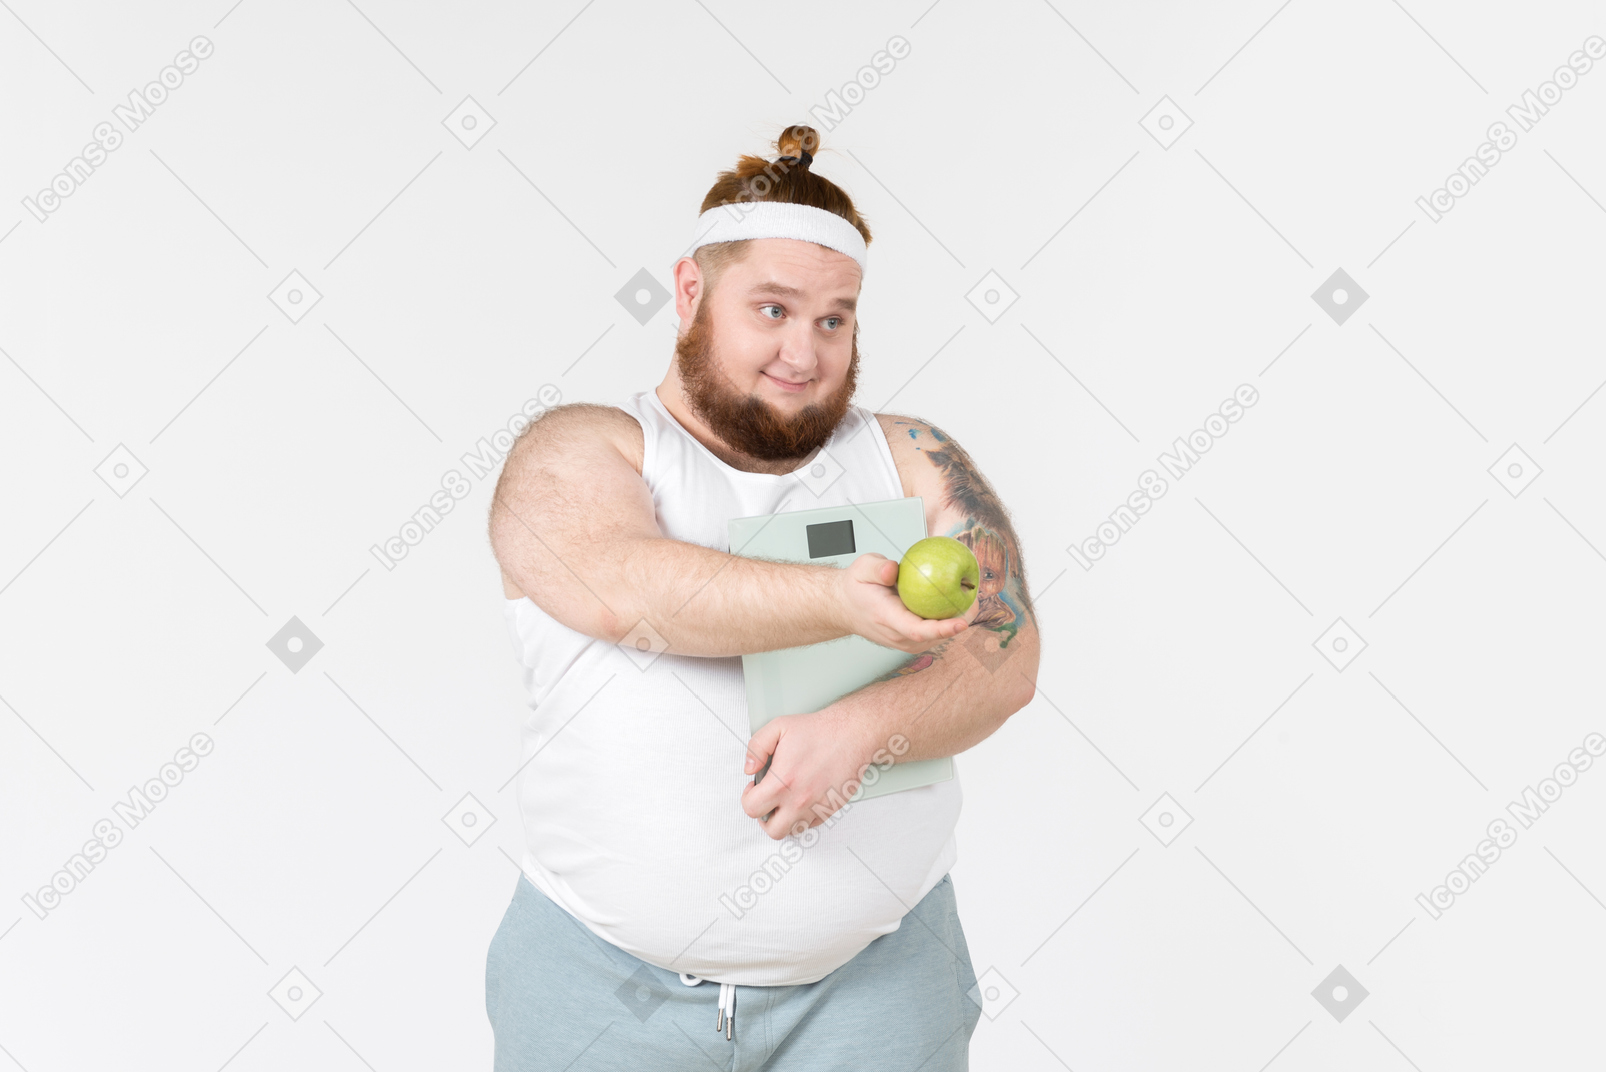 Big guy in sportswear holding digital weights and apple